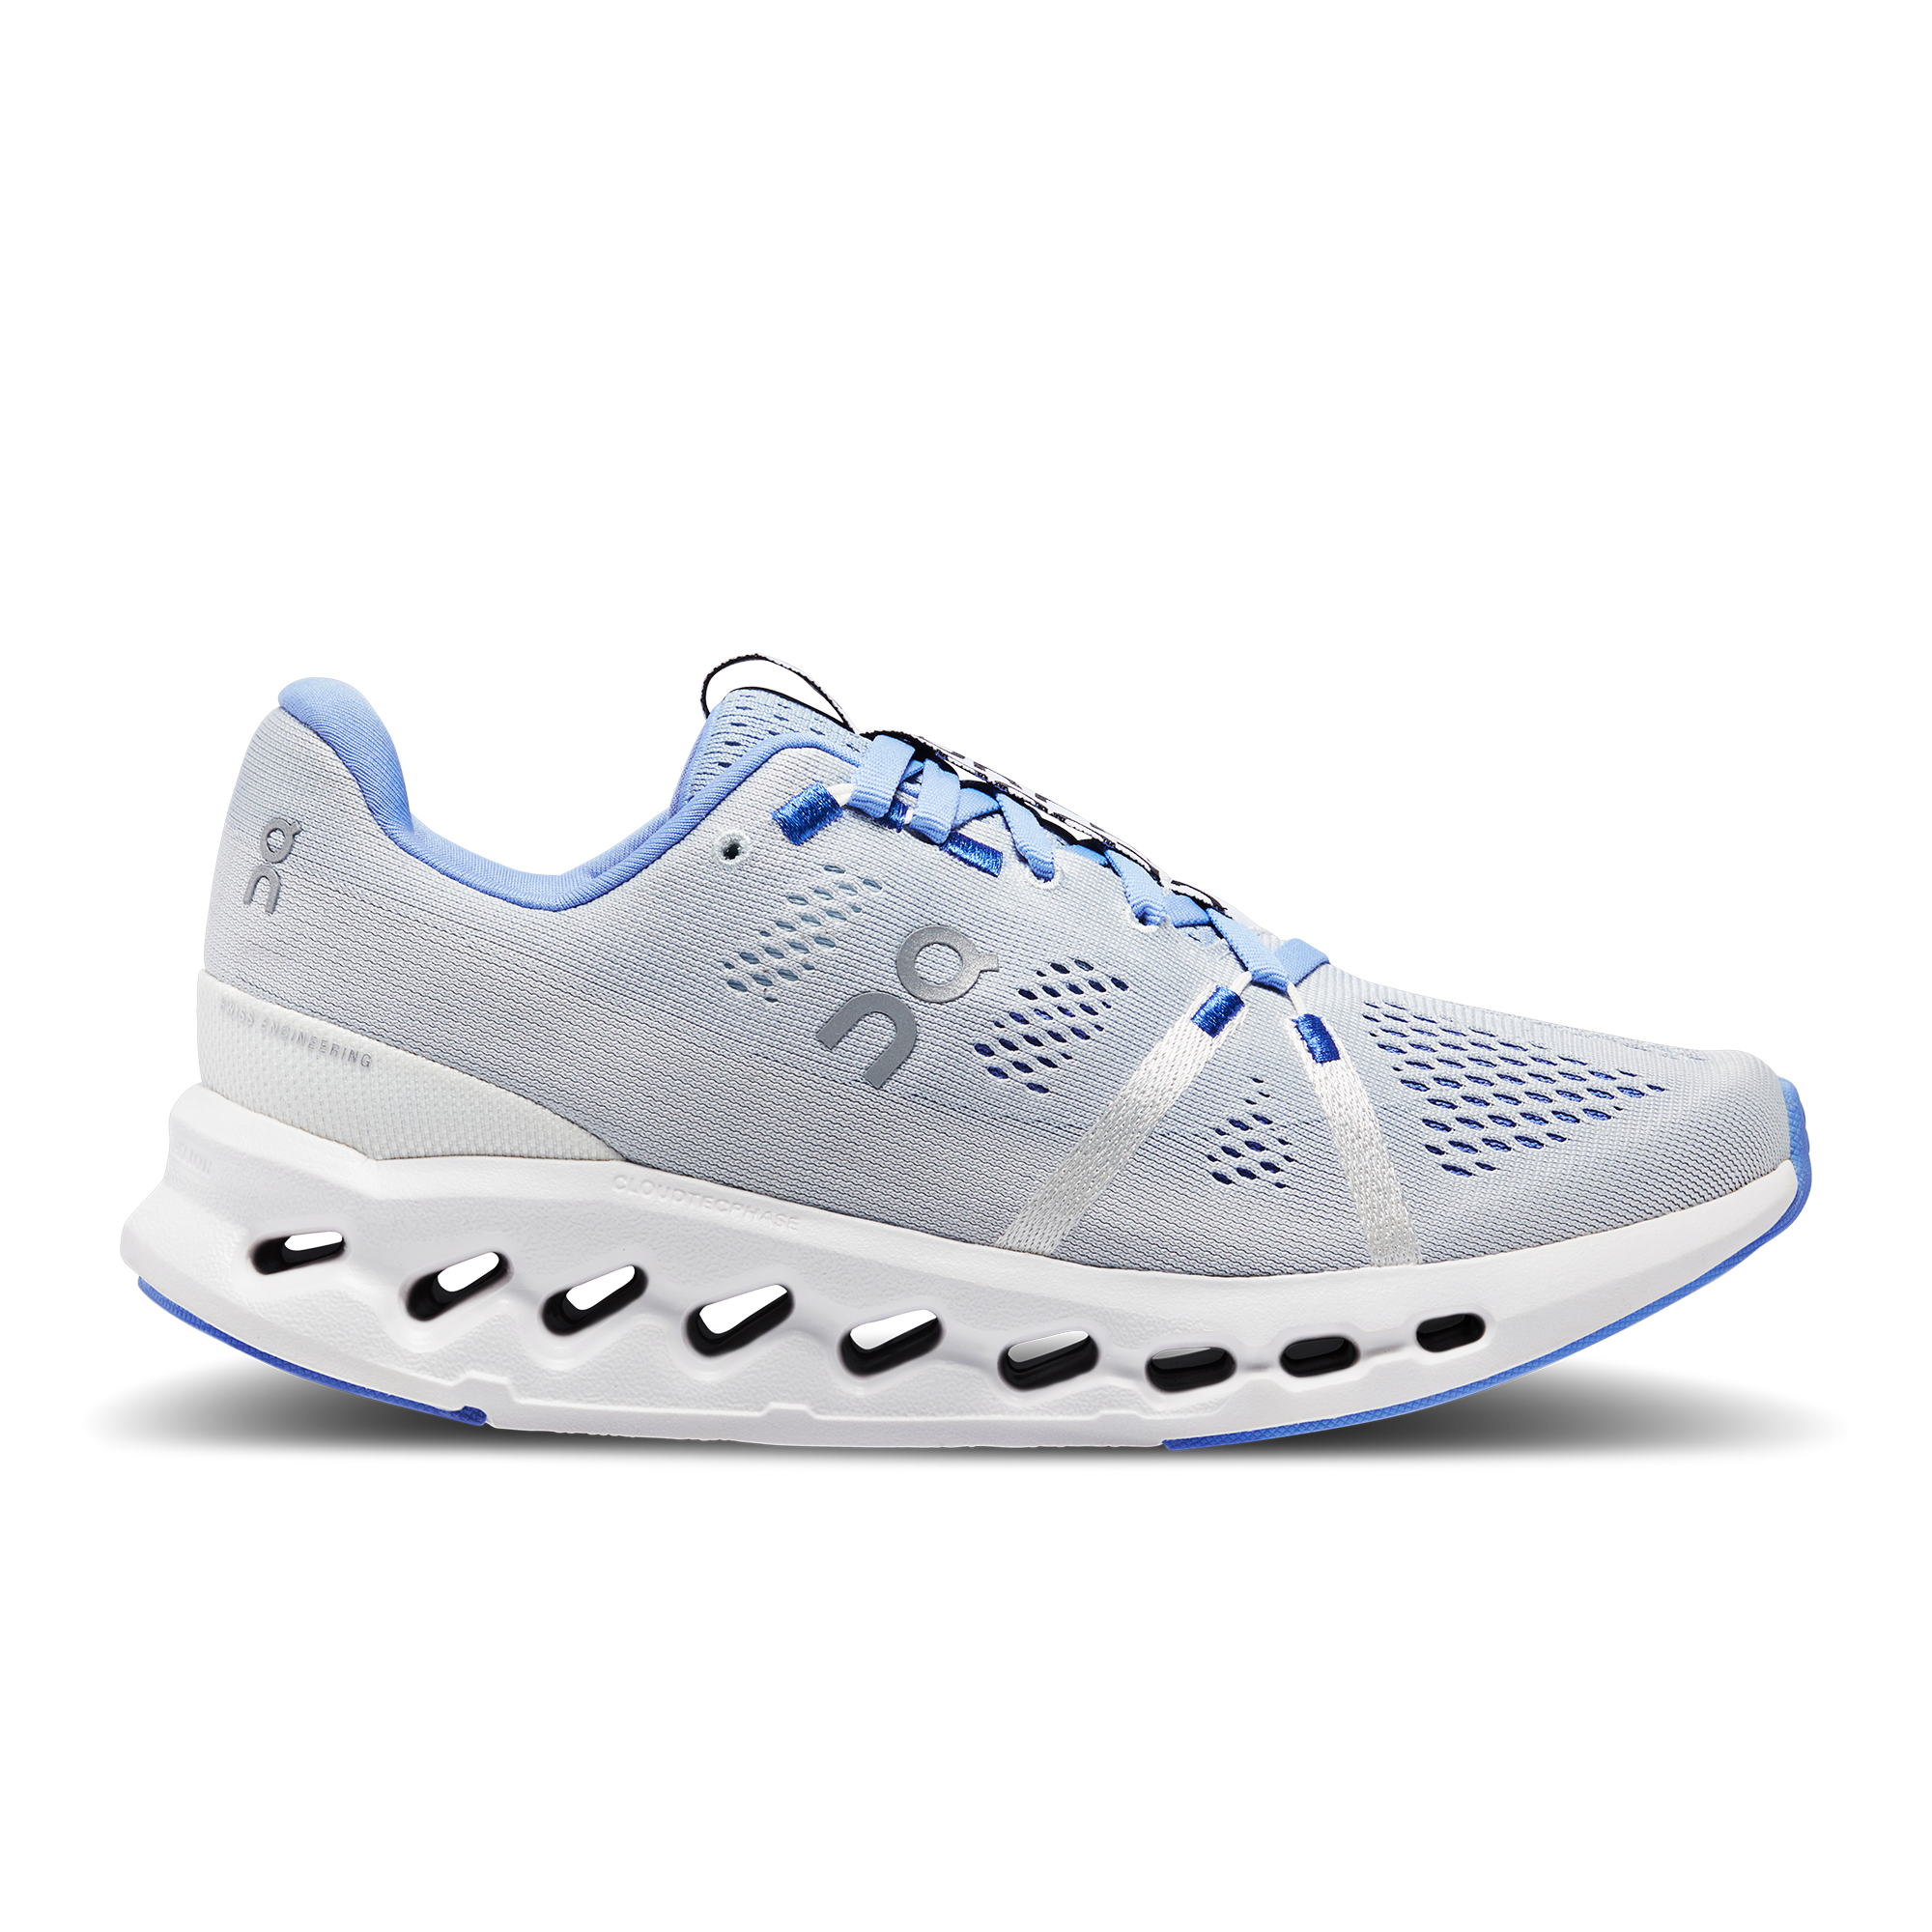 On Cloudsurfer Women's Cushioned Road Running Shoes